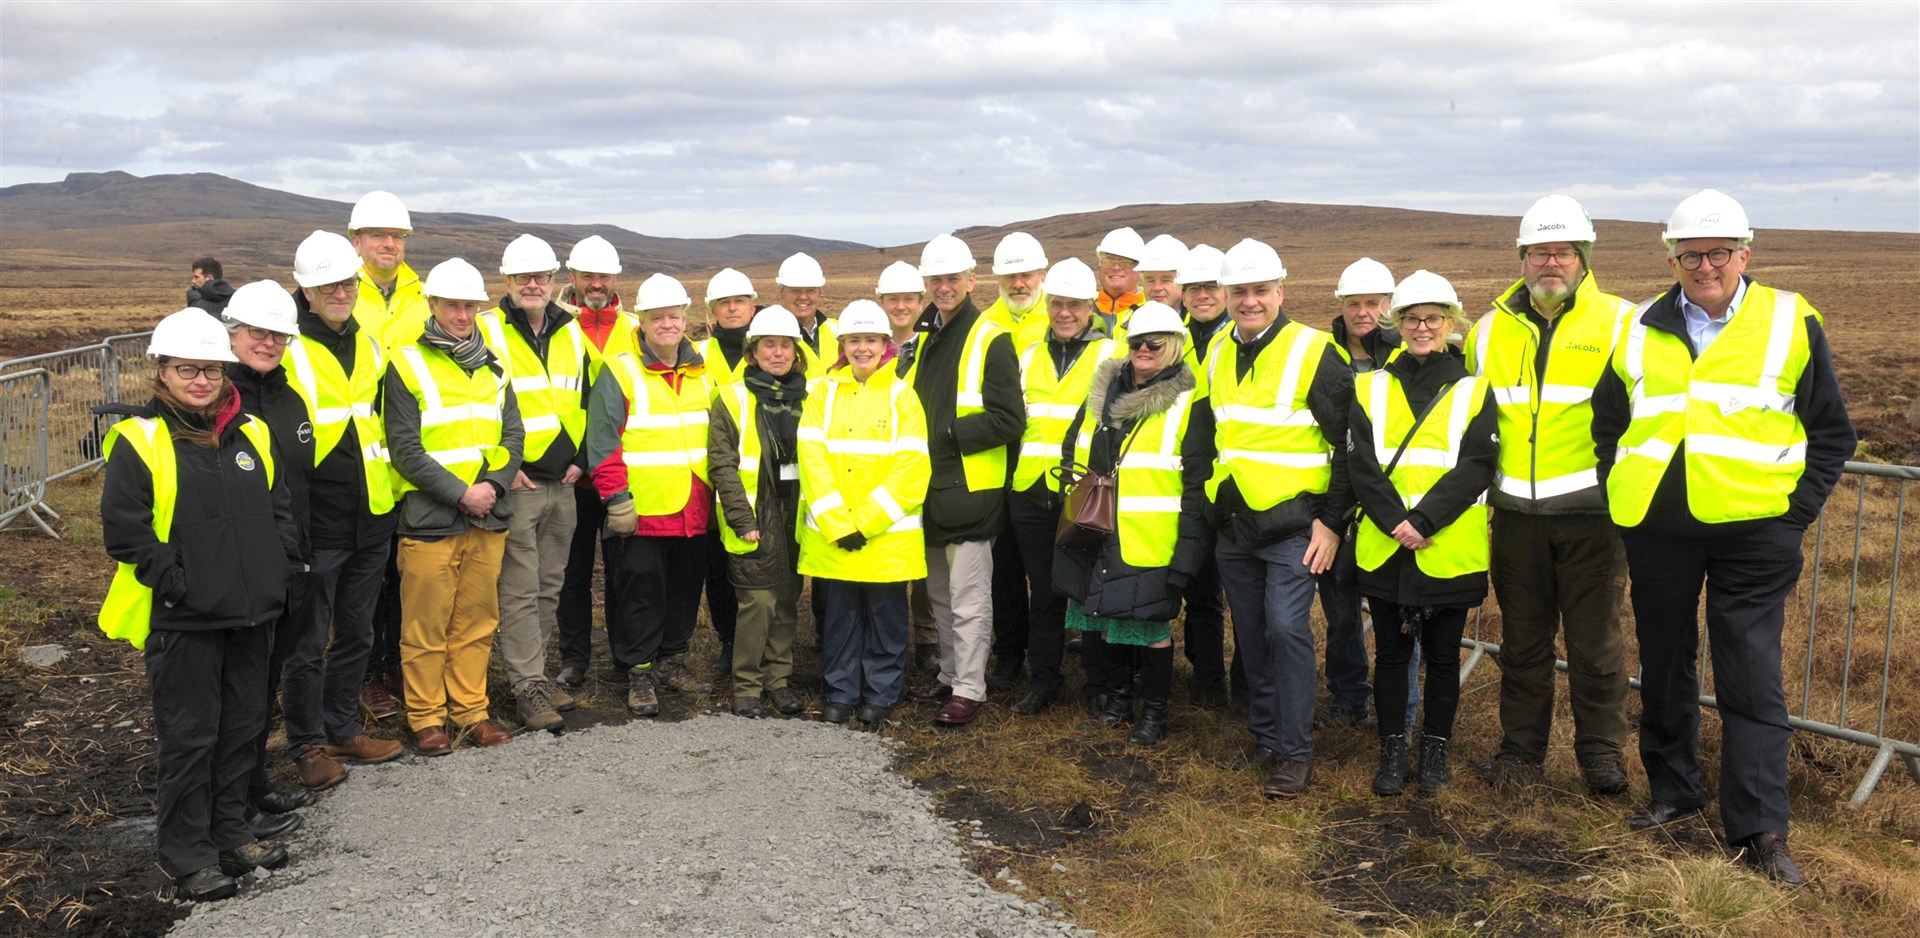 Lib Dem MP Jamie Stone was among those who attended a groundbreaking ceremony for the Sutherland Spaceport last week.